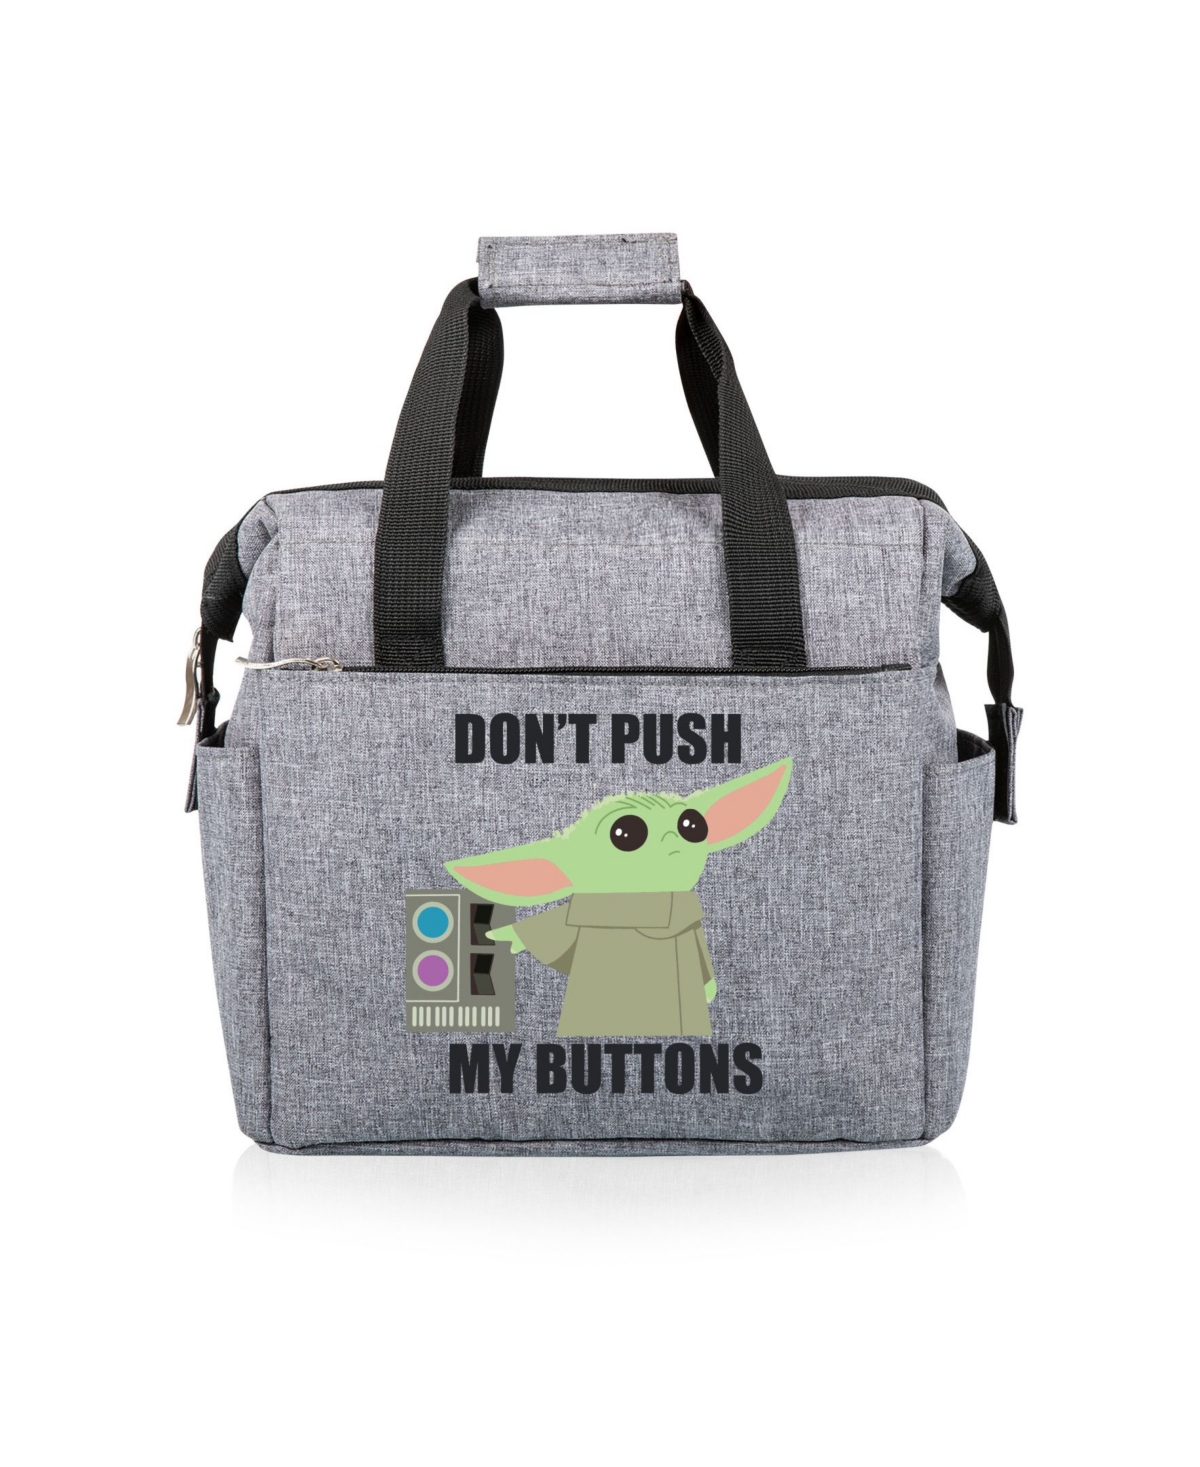 Mandalorian the Child on the Go Buttons Lunch Cooler Tote Bag - Heathered Gray